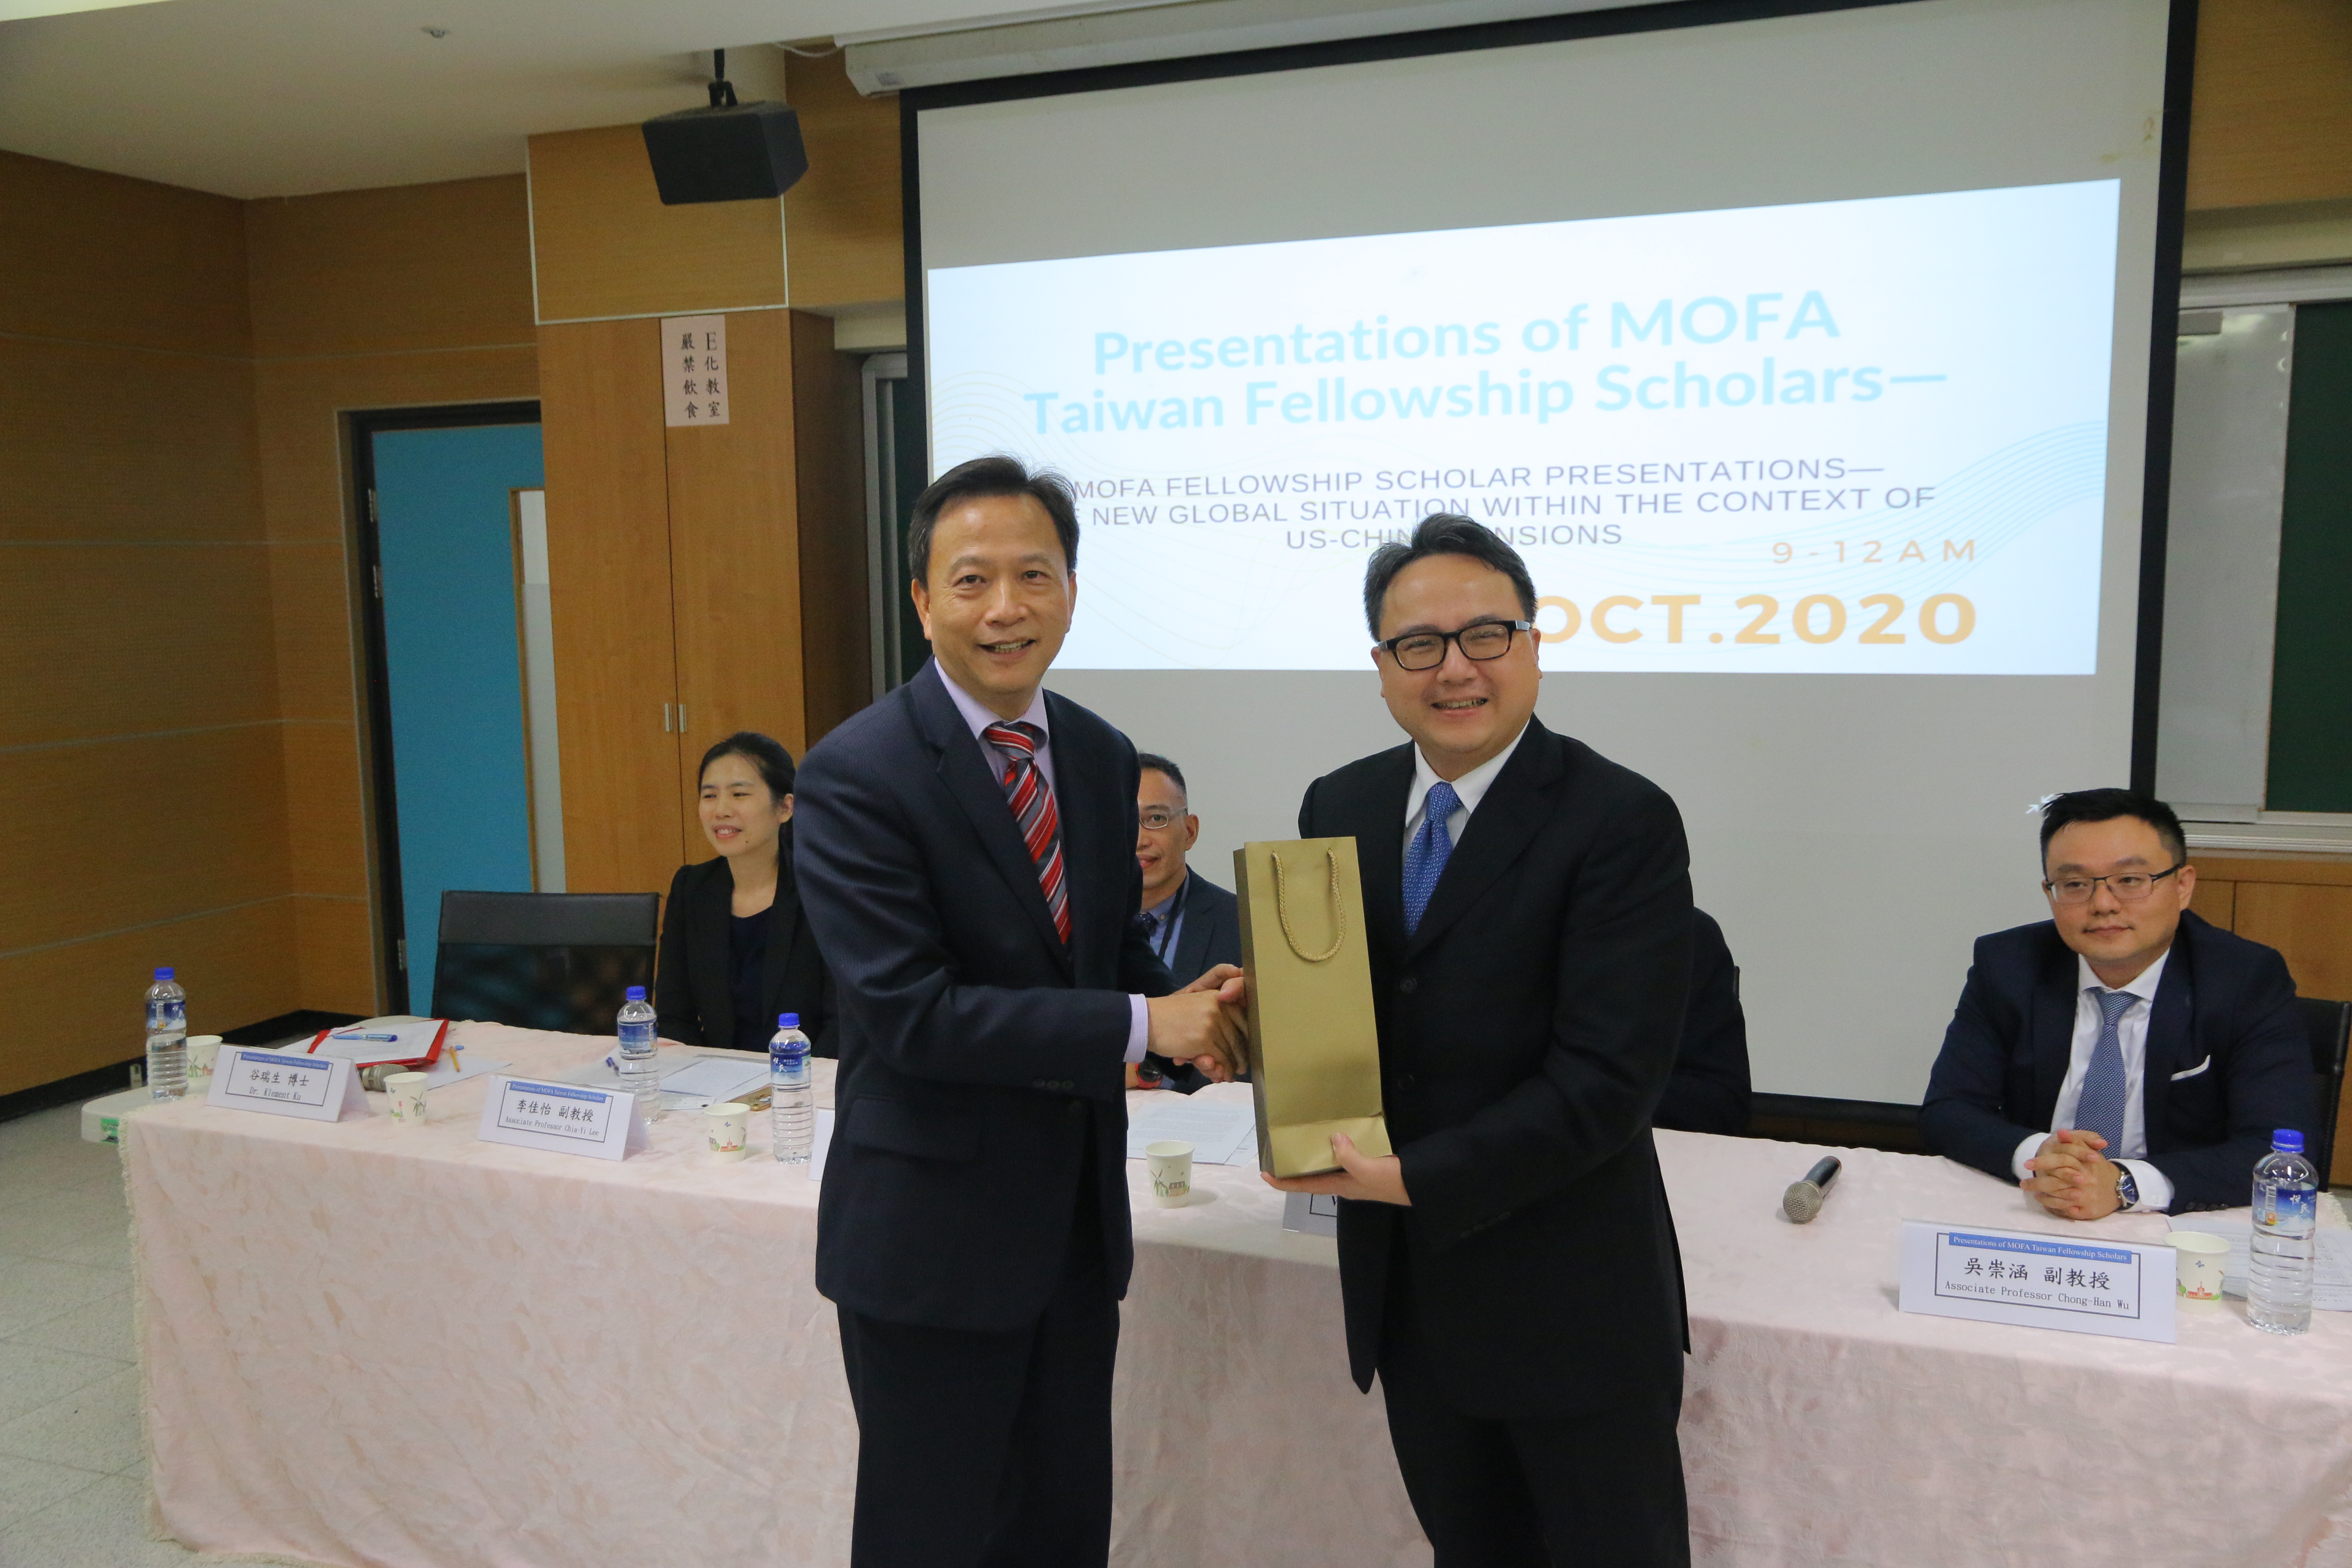 2020 Presentations of MOFA Taiwan Fellowship Scholars—The New Global Situation within the Context of US-China Tensions:picture23